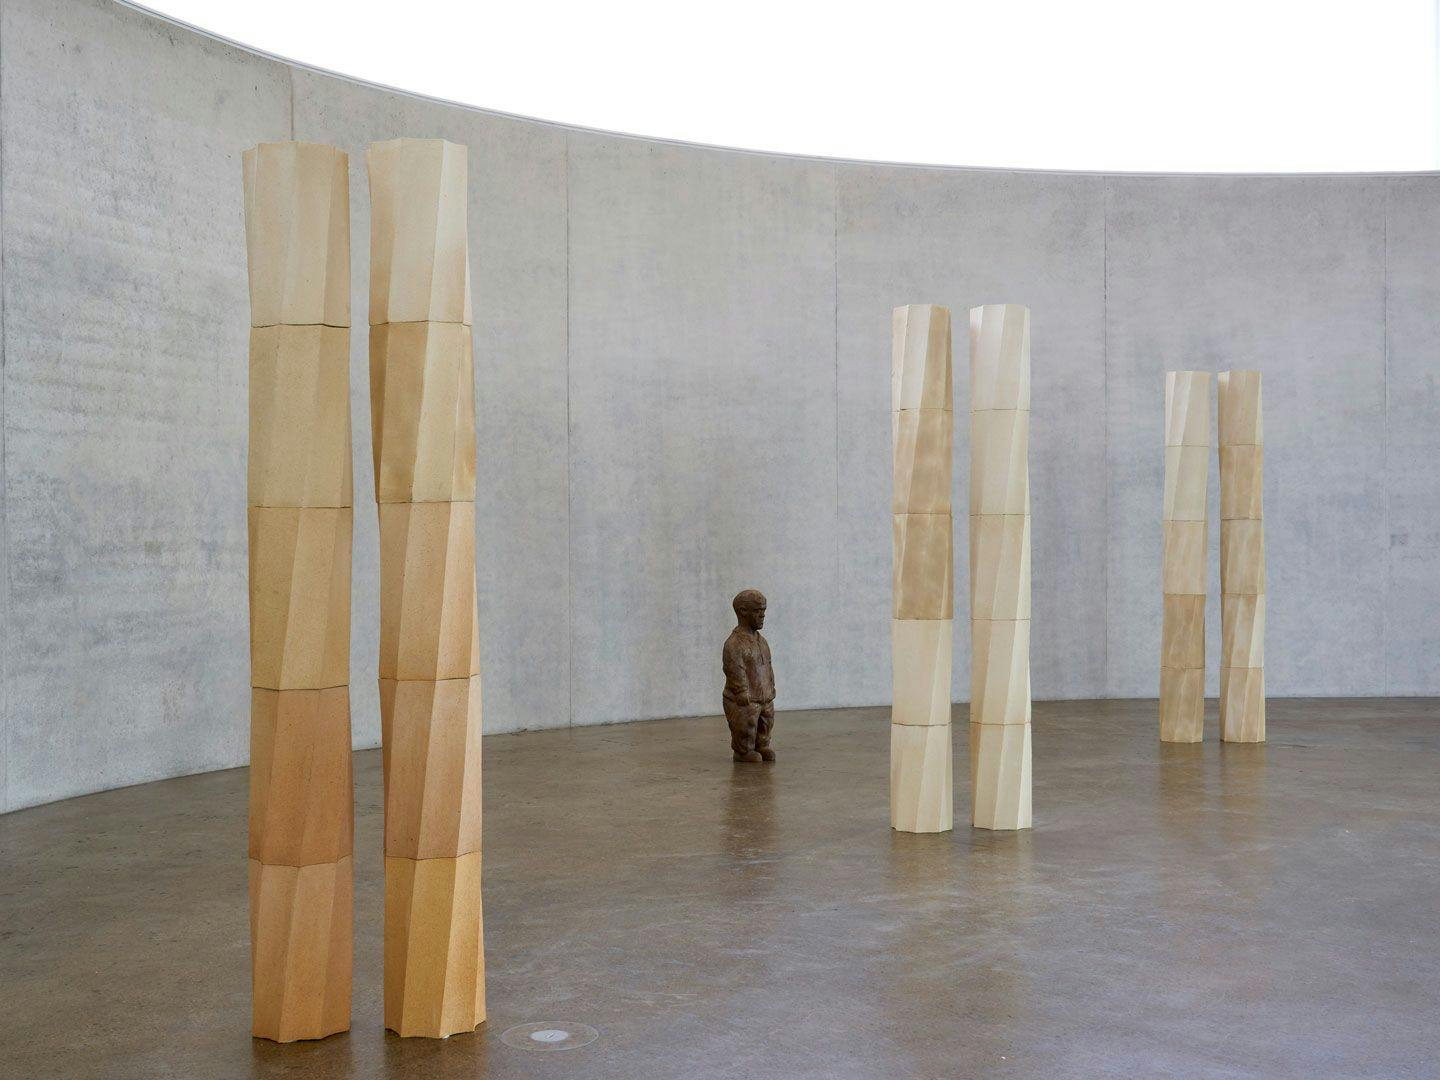 A mixed media sculptural installation by Juan Muñoz, titled, Schwelle (Threshold), dated 1991, installed at Thomas Schütte Foundation, in Neuss, Germany, in 2018 .